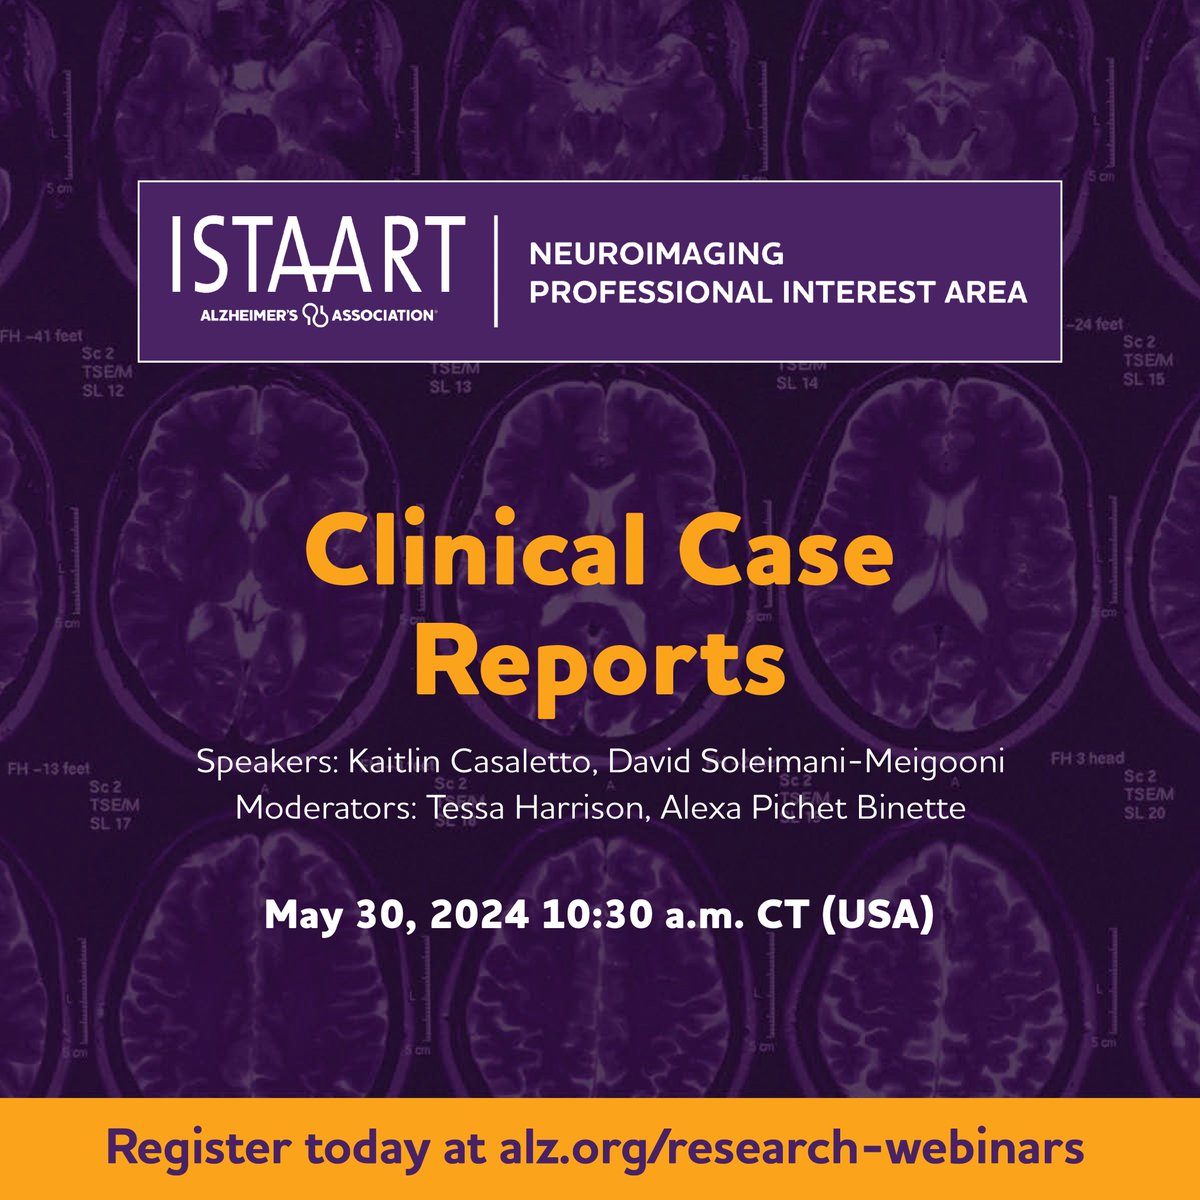 Join us on May 30th for our @ISTAART #NeuroimagingPIA Clinical Case Report webinar, lead by Kaitlin Casaletto and David Soleimani-Meigooni @kbcasaletto @UCSF @RabLab_UCSF 🧠📢 🗓️Date: May 30th, 10.30 am CT / 5.30 PM CET 💻Register: alz-org.zoom.us/webinar/regist…